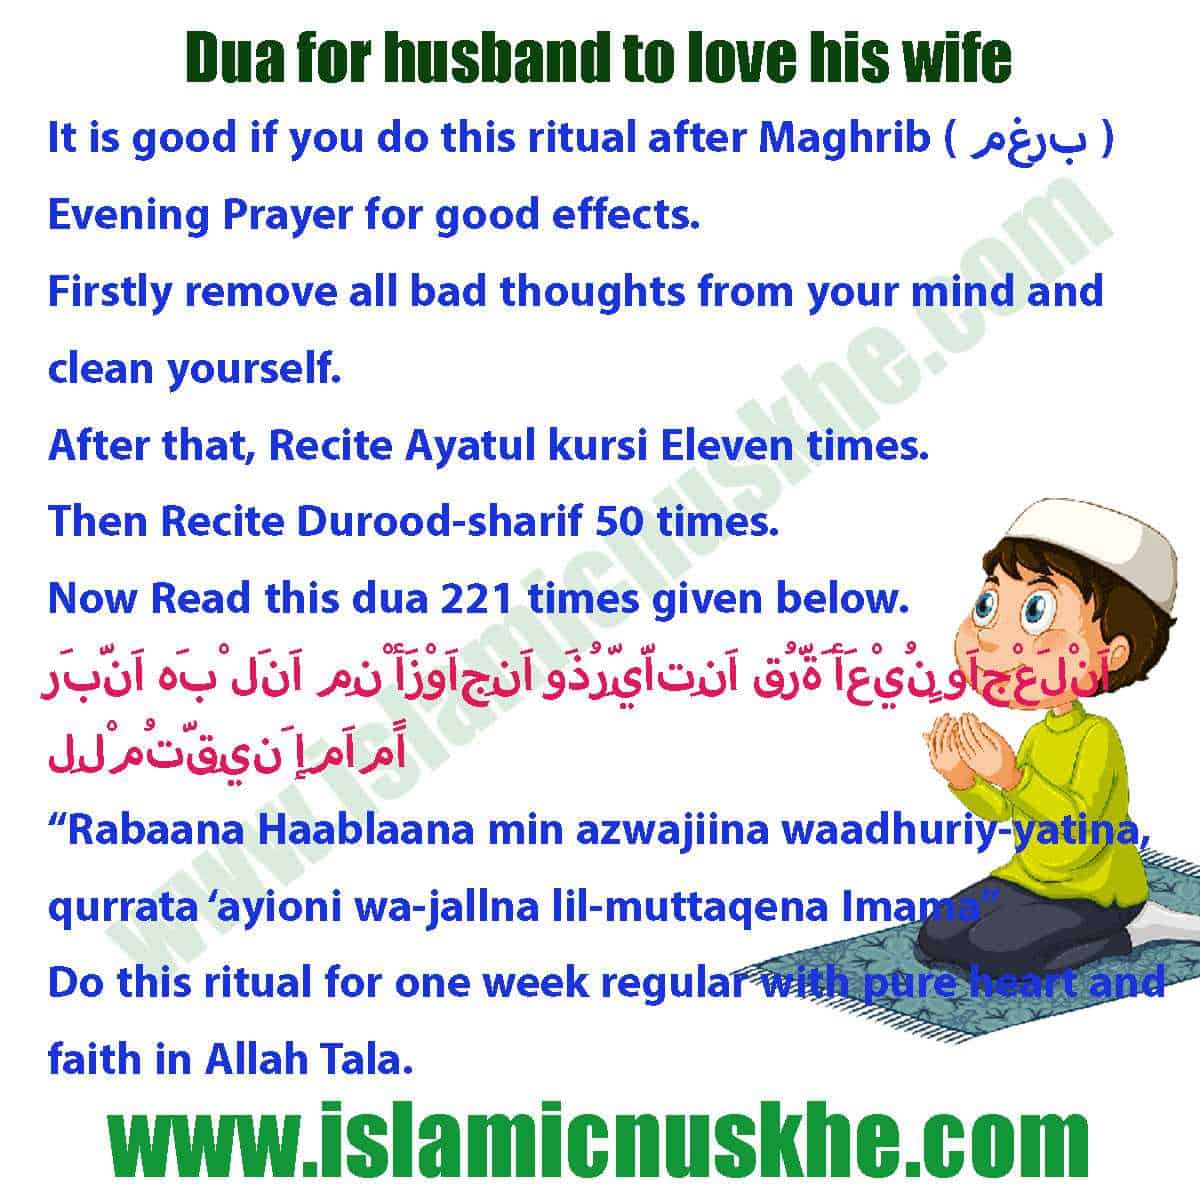 Here is Dua for husband to love his wife Step by Step